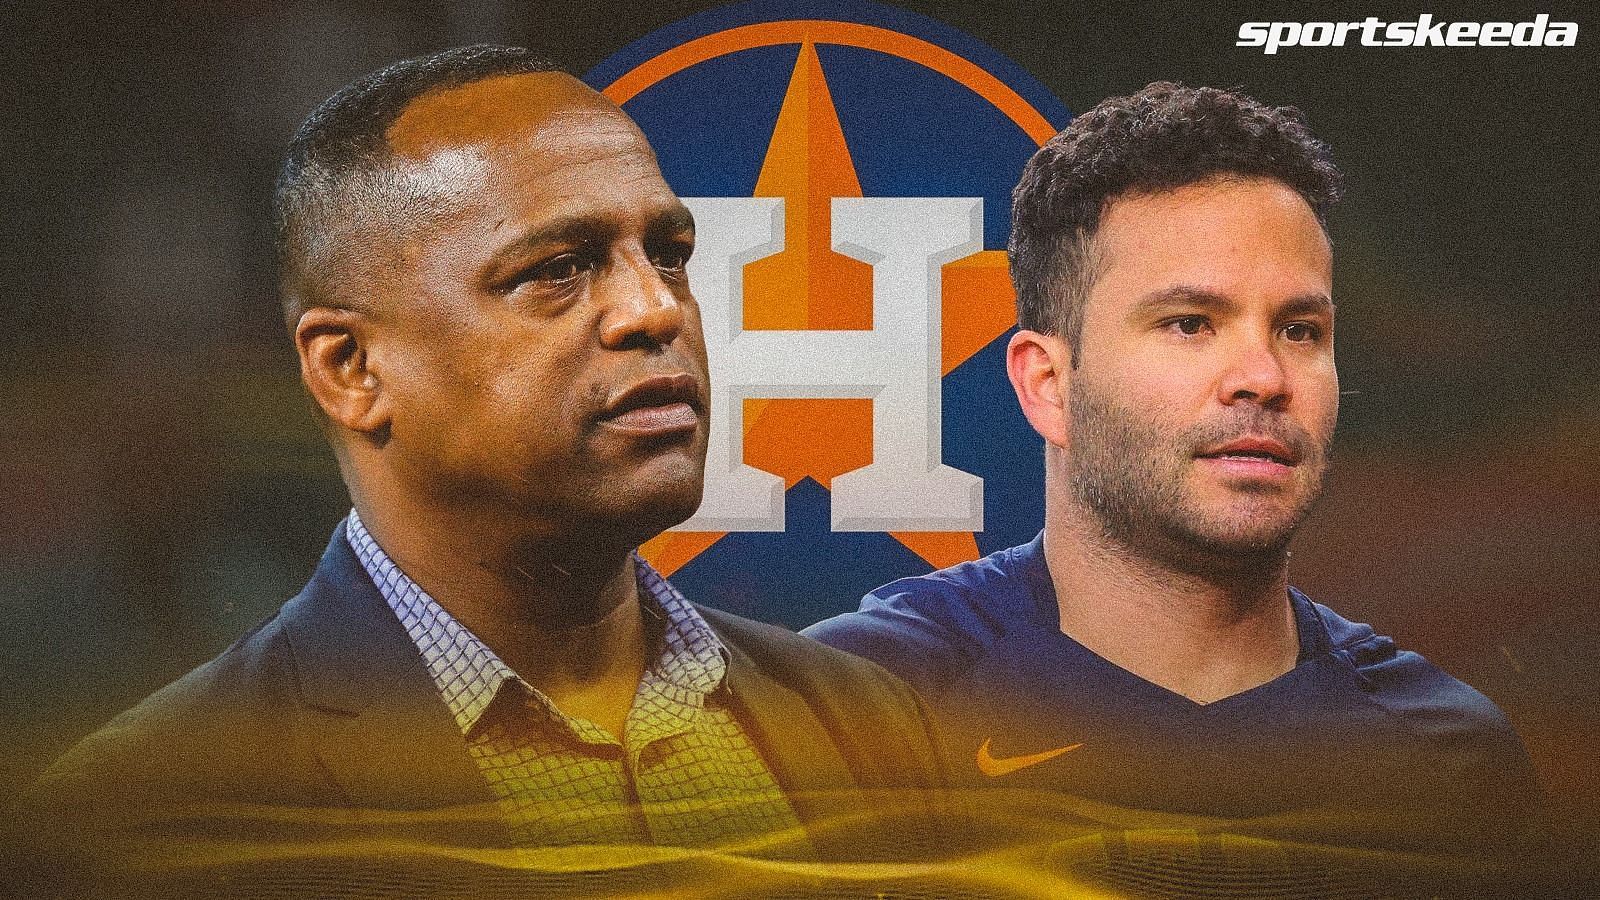 Houston Astros general manager Dana Brown believes Jose Altuve is still a pivotal player.